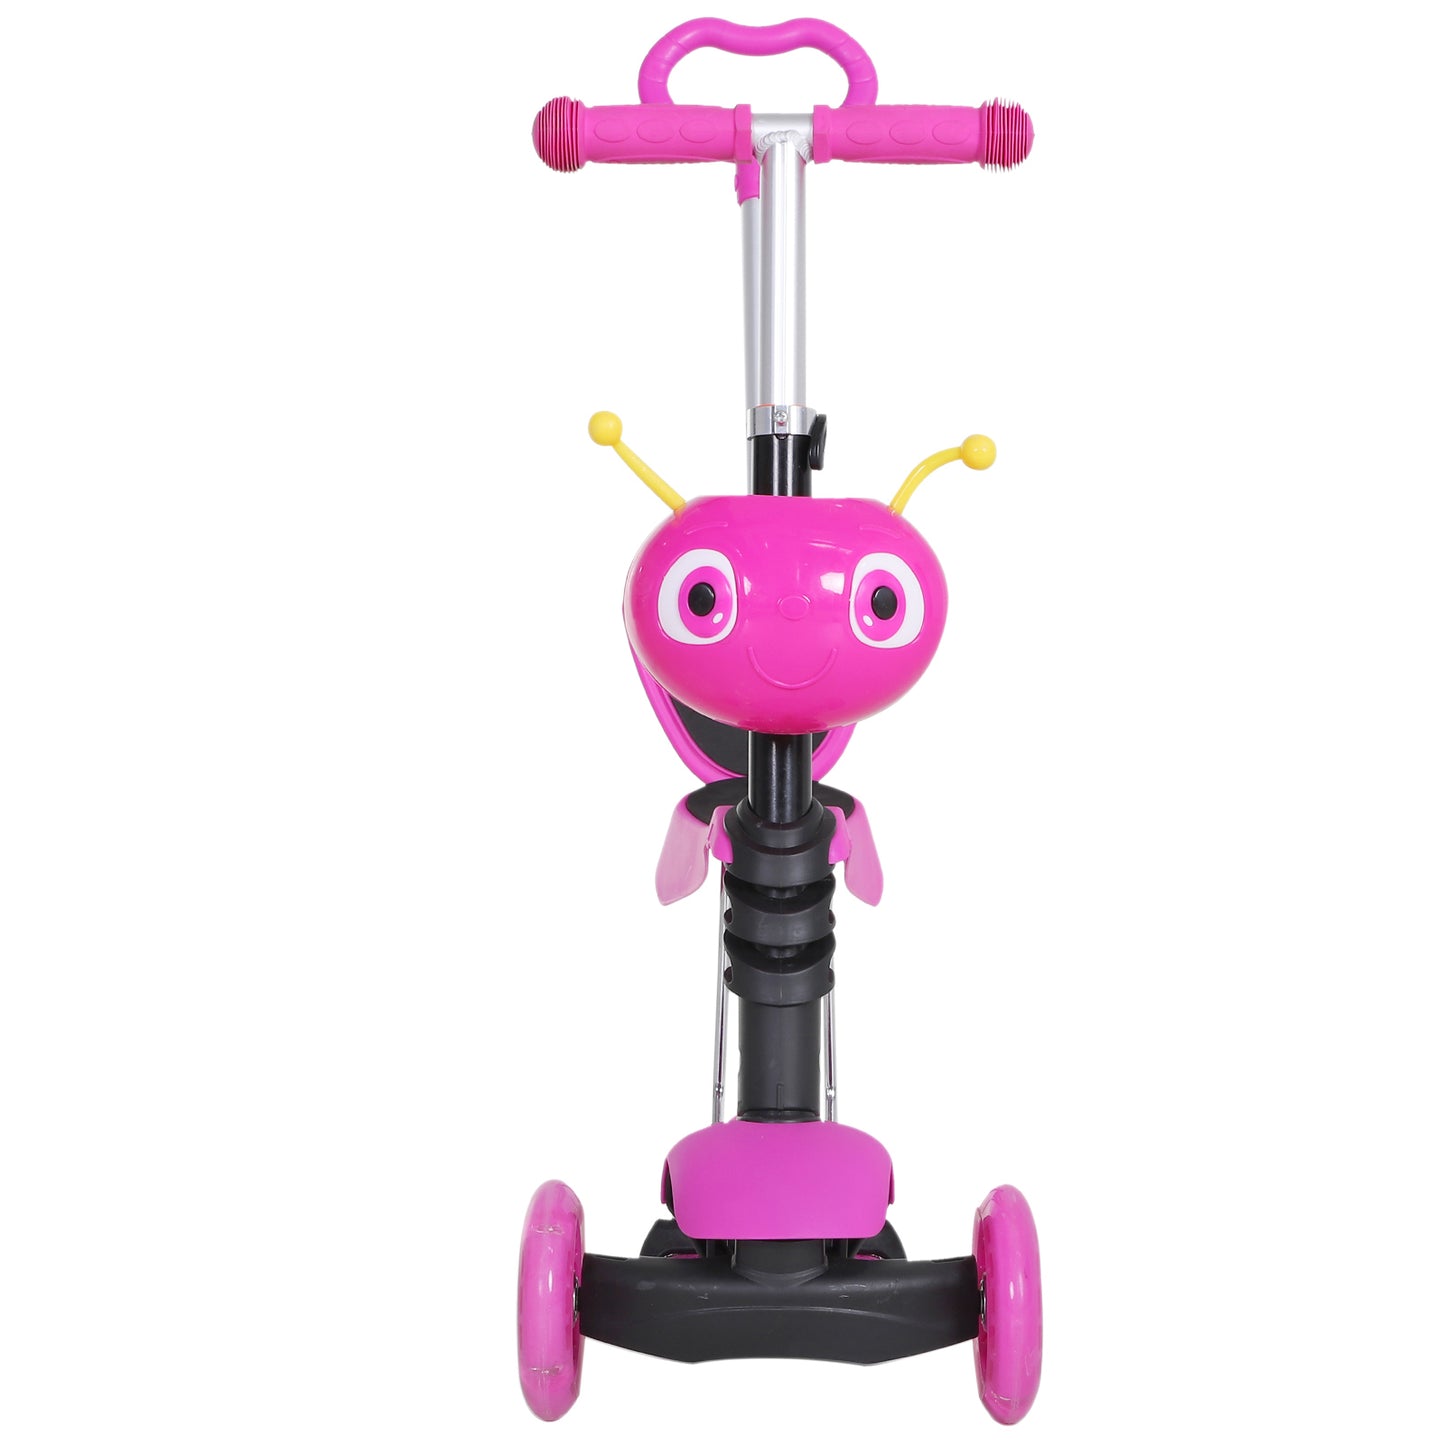 HOMCOM 5-in-1 Kids Kick Scooter W/Removable Seat-Pink